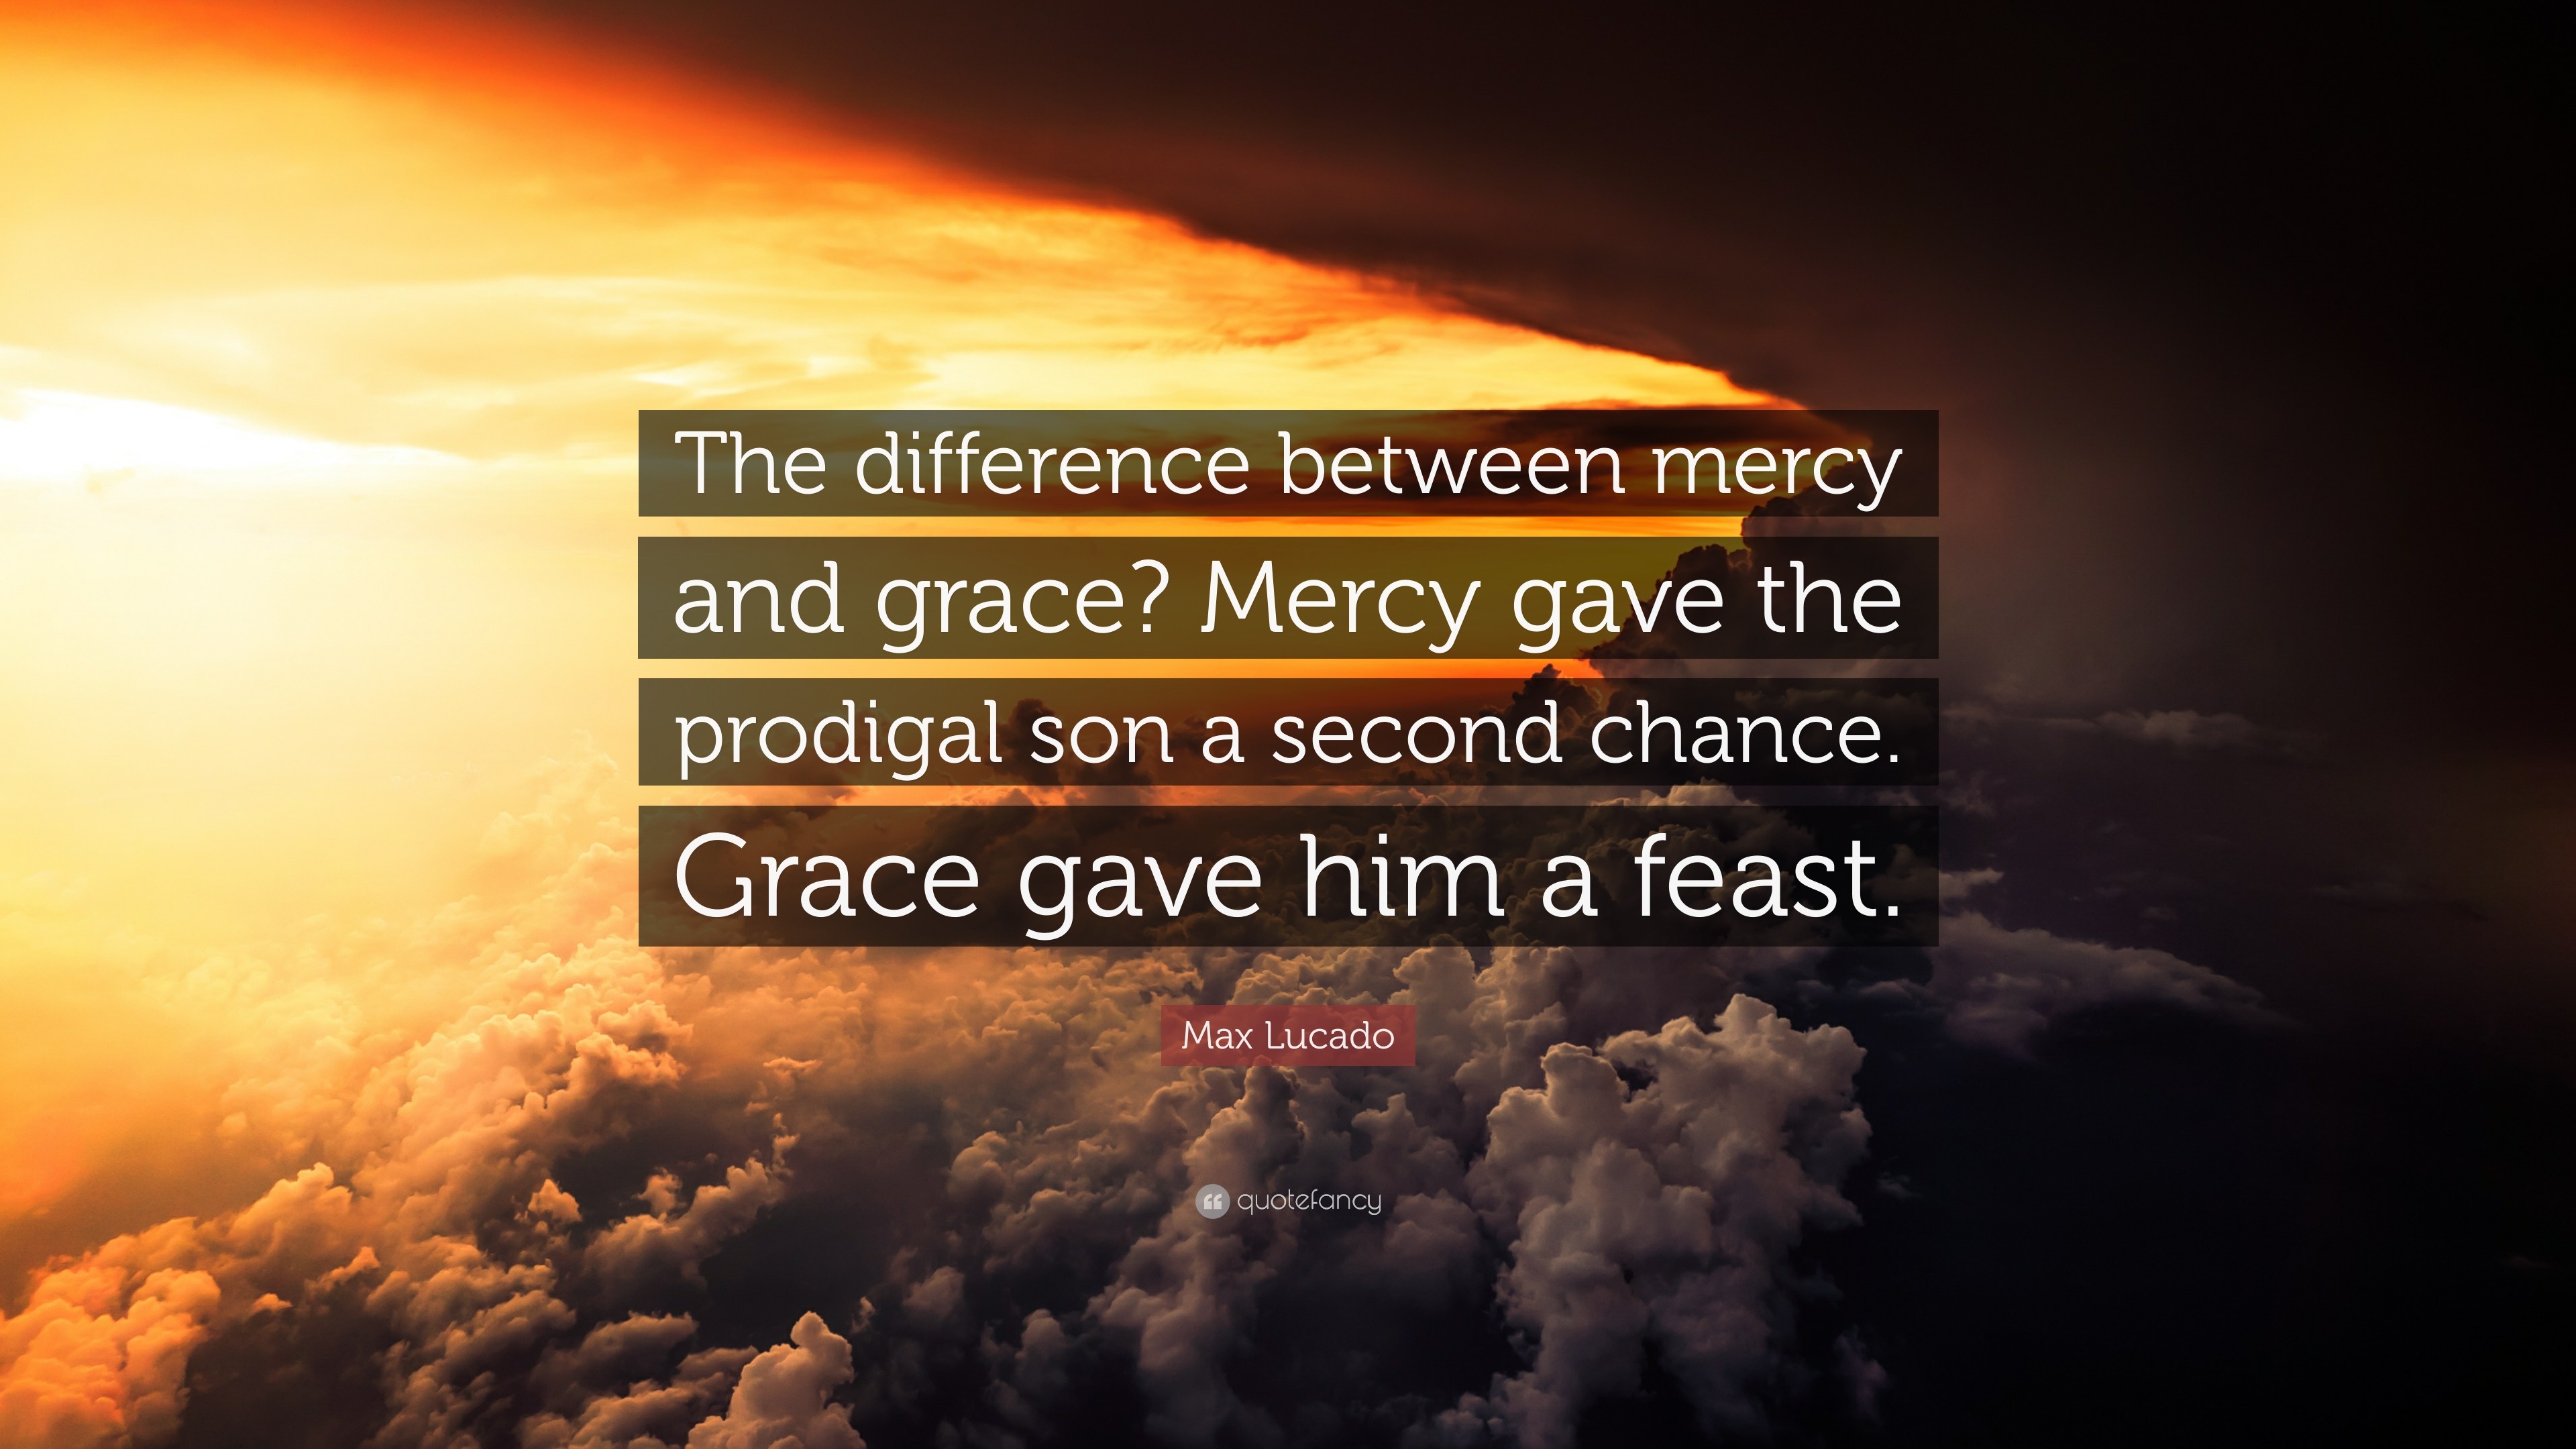 Max Lucado Quote: “The difference between mercy and grace? Mercy gave